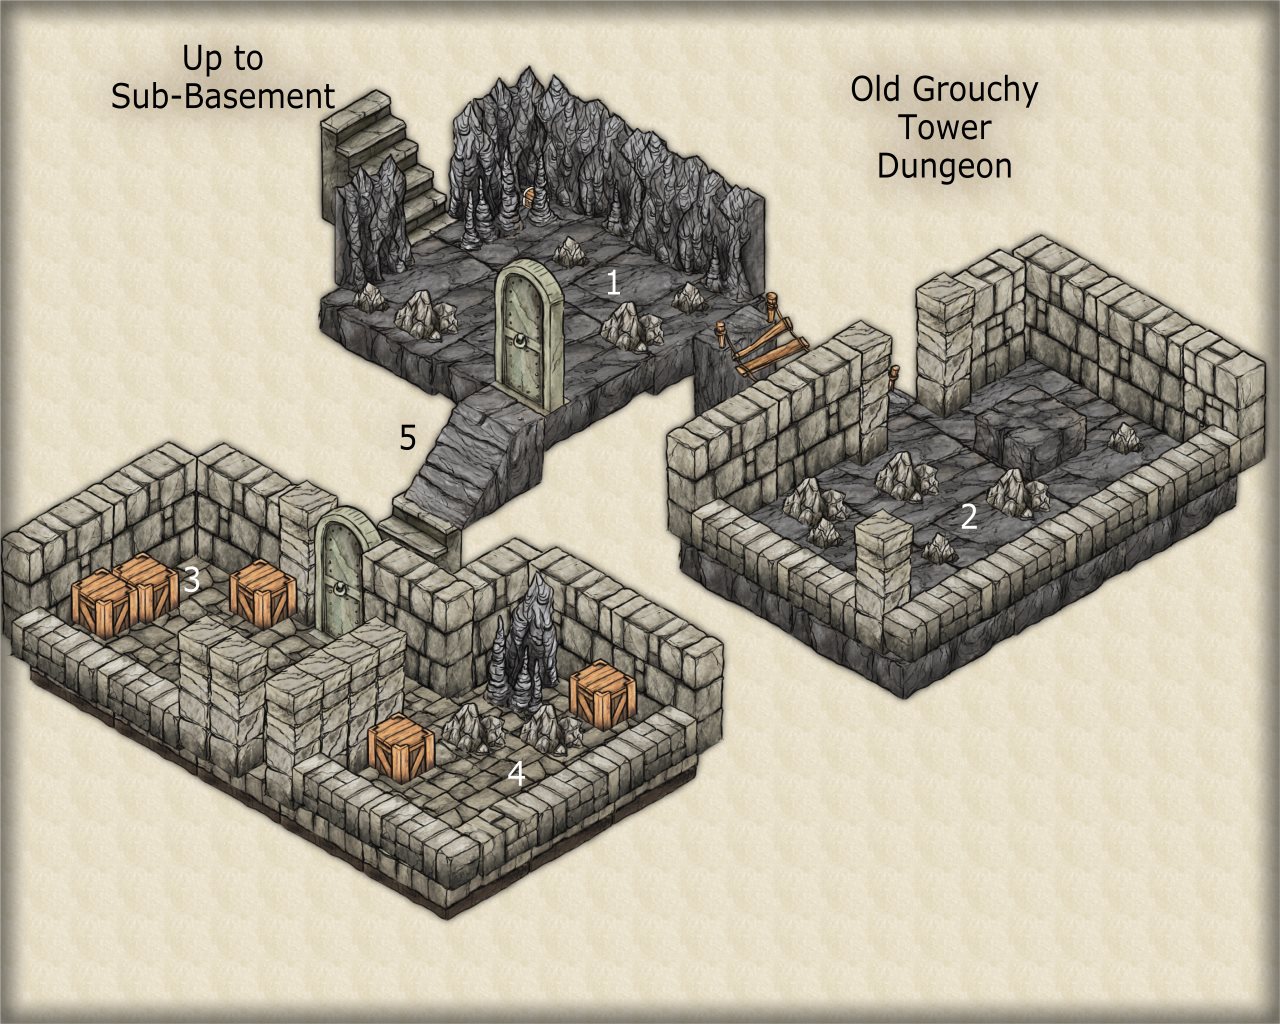 Nibirum Map: old grouchy tower dungeon by JimP